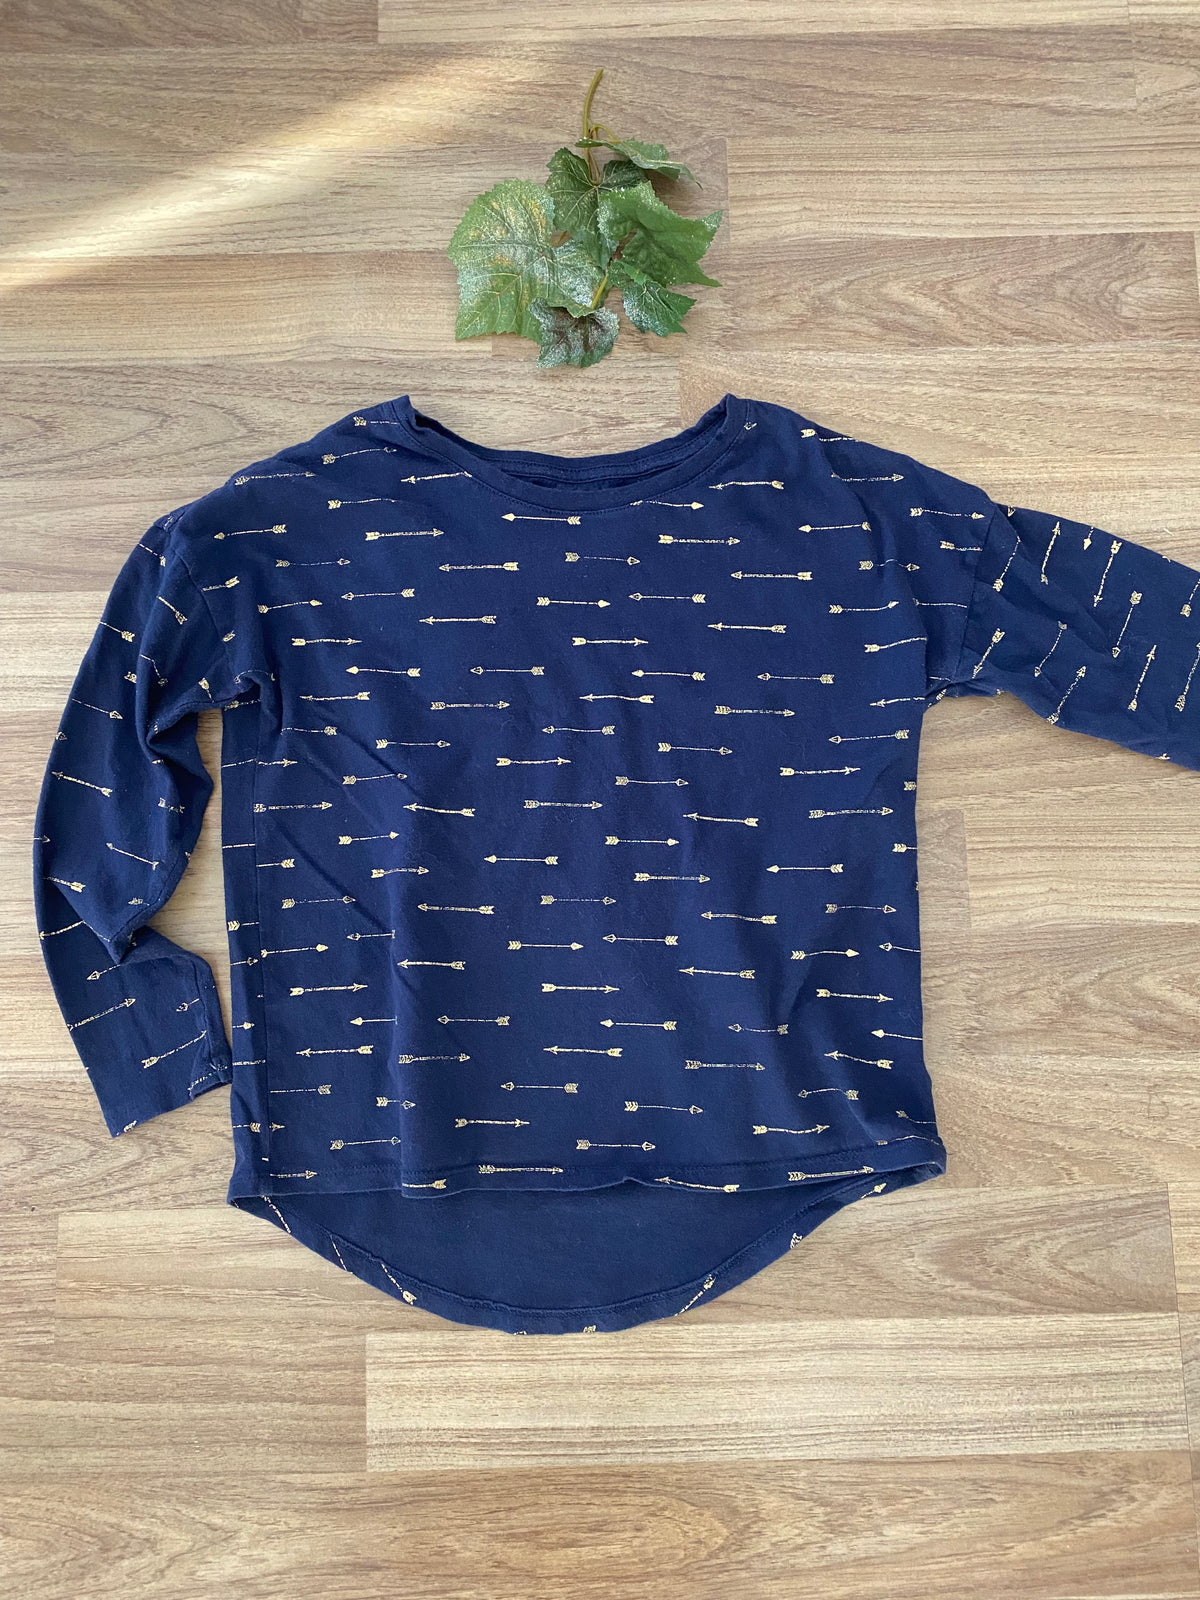 Long Sleeve Graphic Top (Girls Size 6-7)